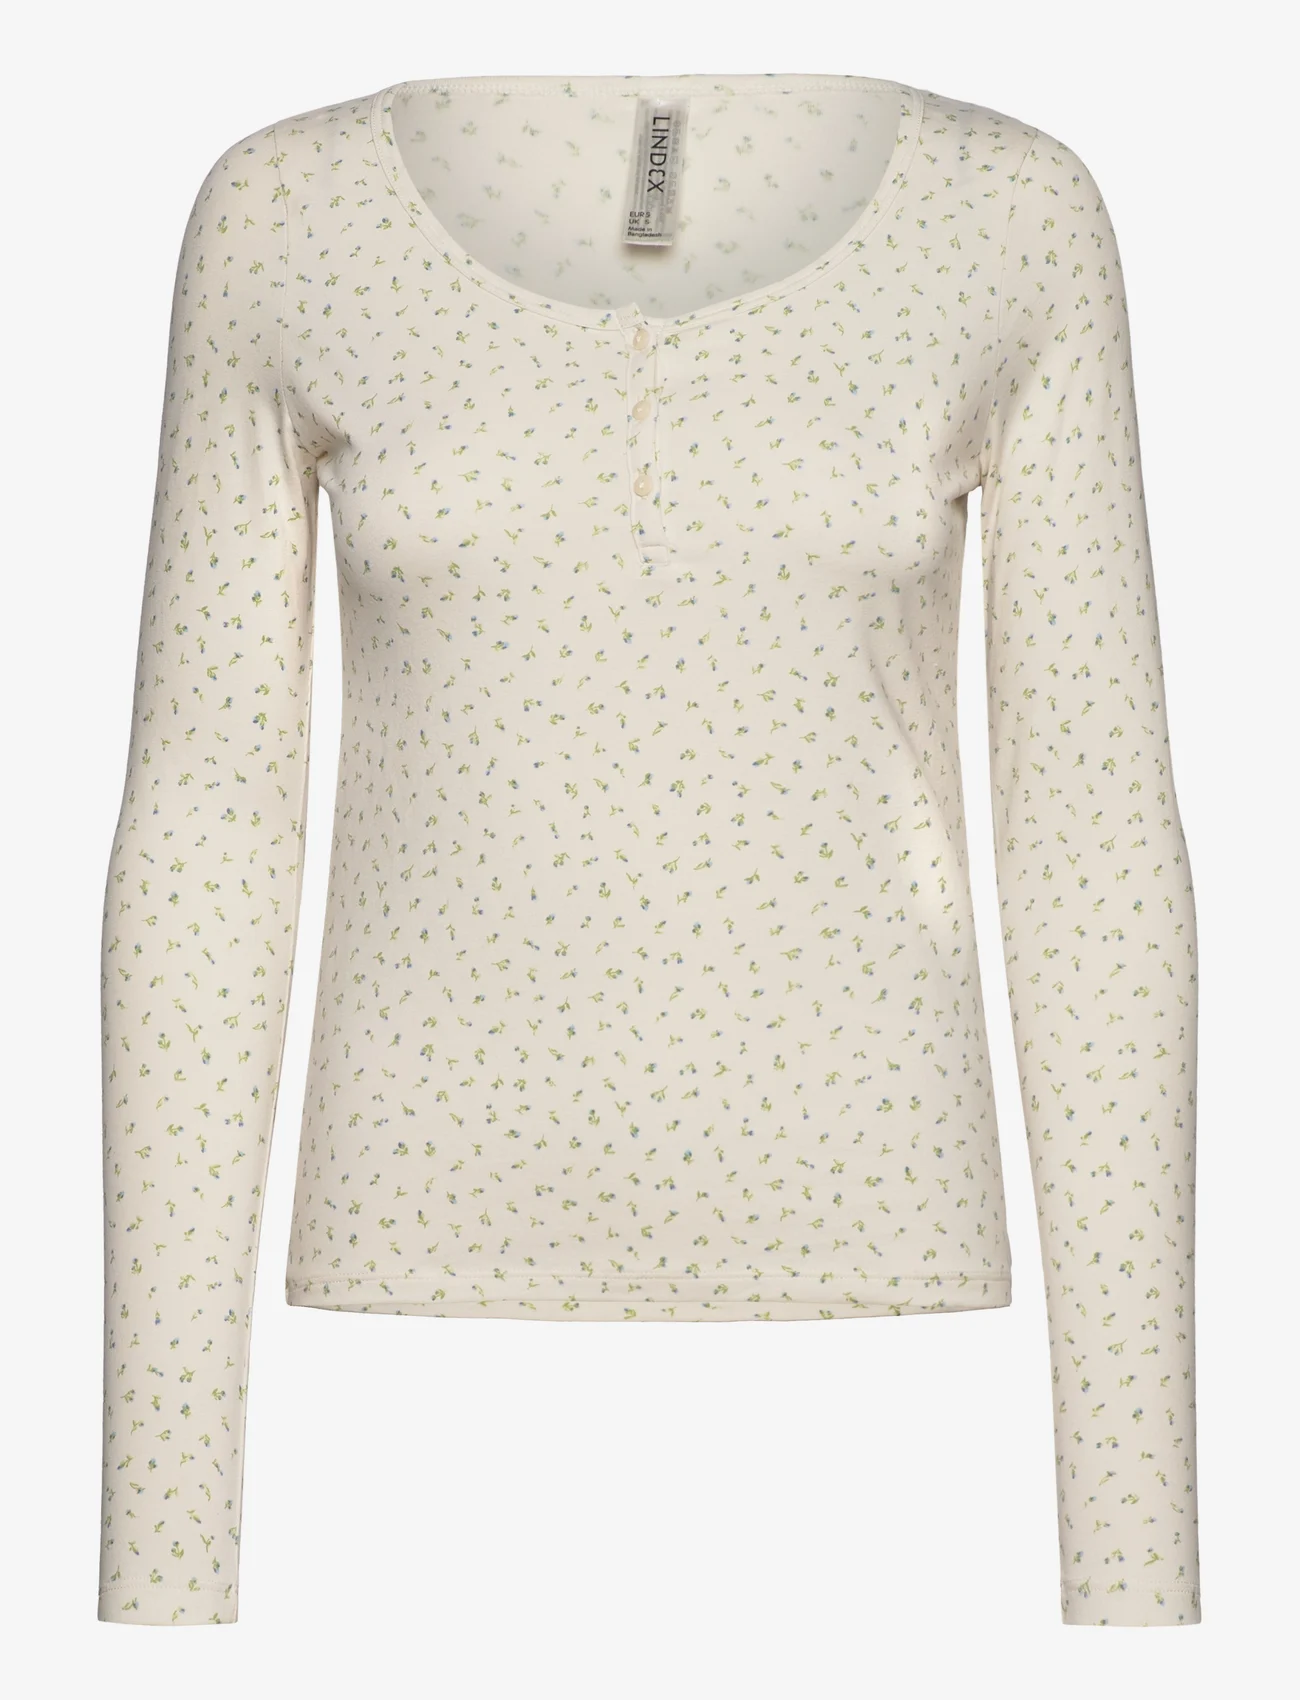 Lindex - Top LS aop flower - lowest prices - white - 0